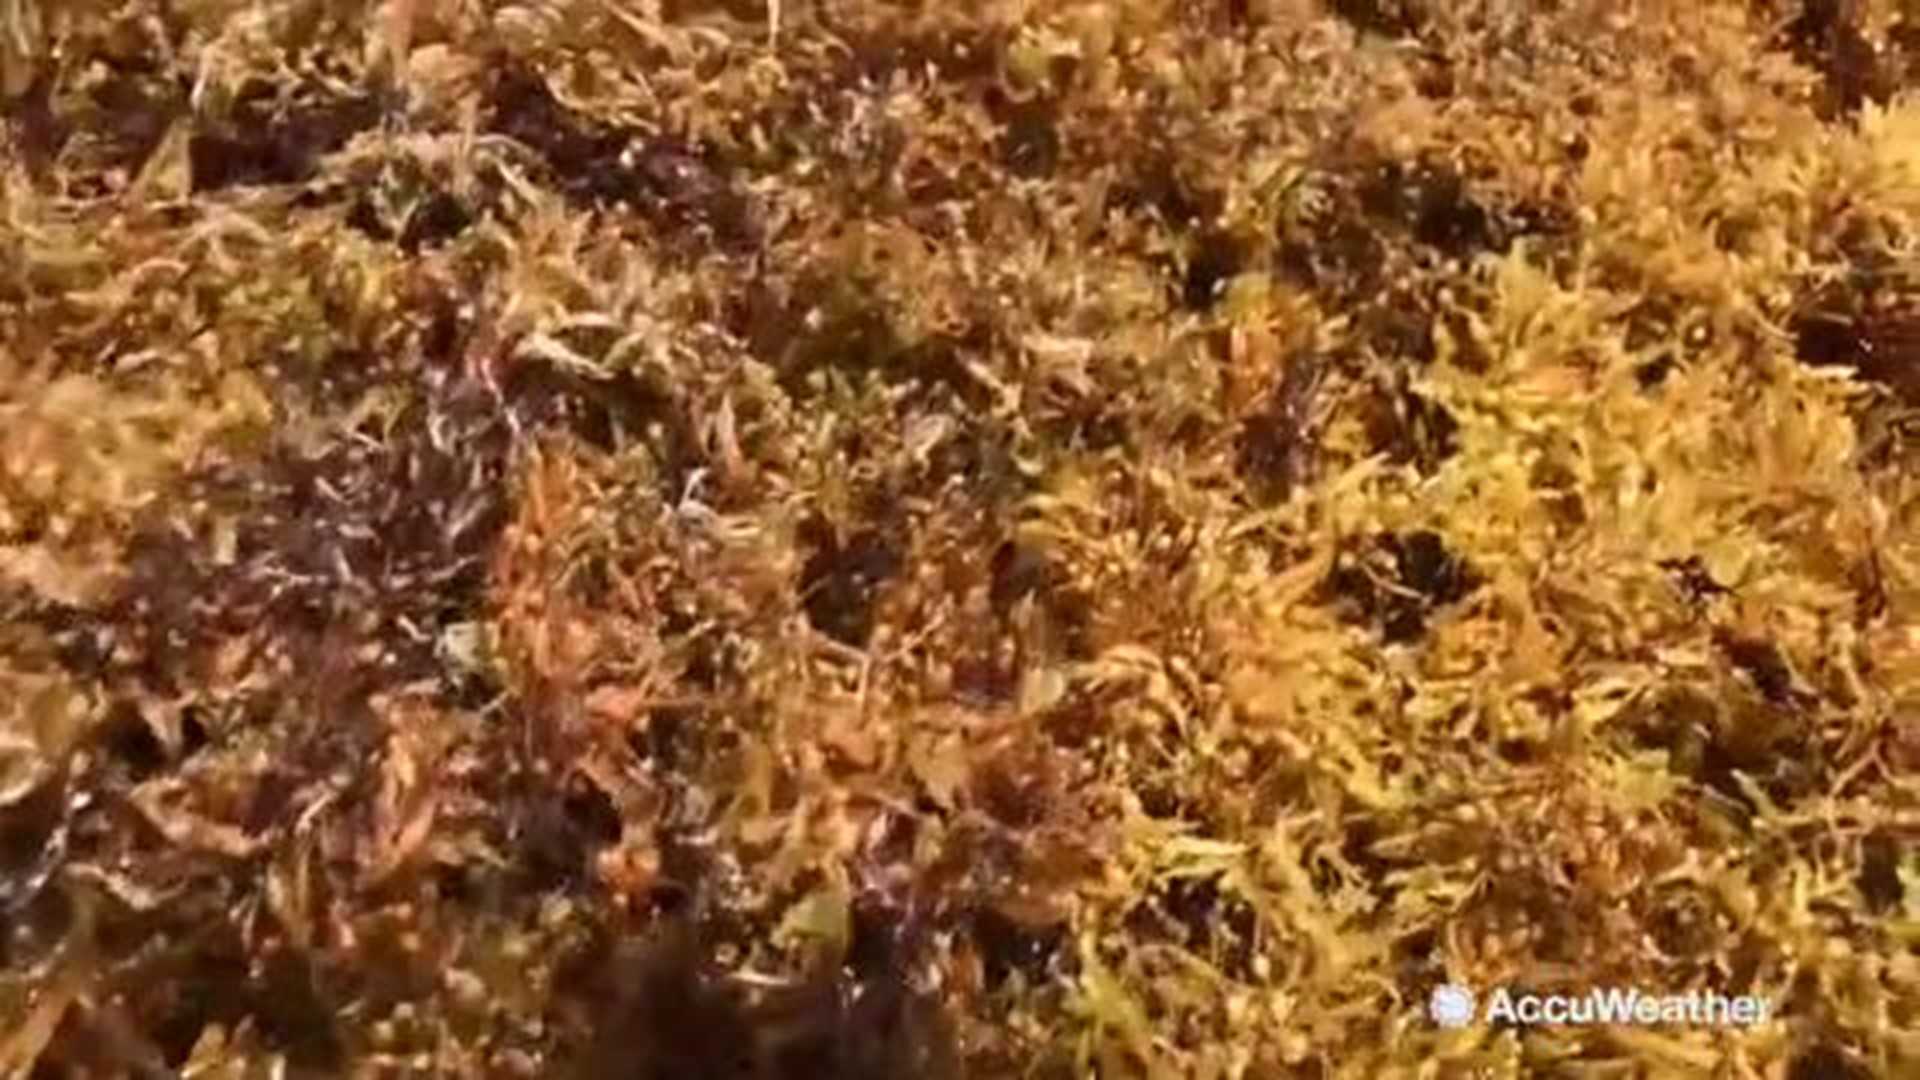  Tourists in Cancun aren't very happy to see the white sand beaches covered in seaweed due to what might be the largest bloom of sargassum ever. 